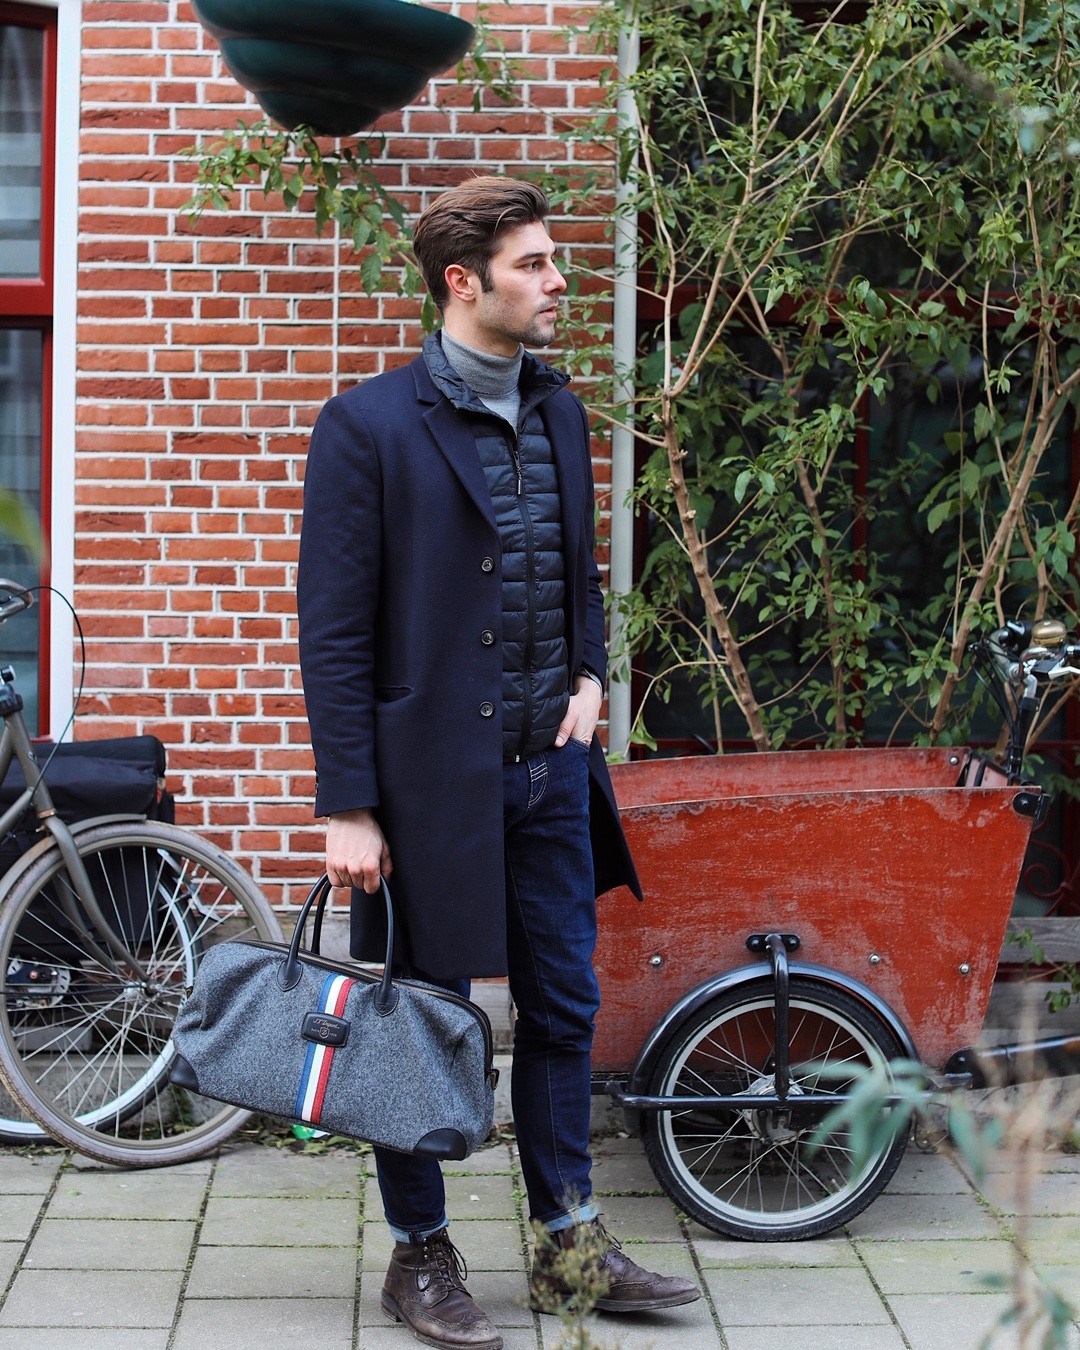 Classic yet stylish, @romainp__ has already adopted it: our new iconic felt bag is a must-have for you gentlemen :